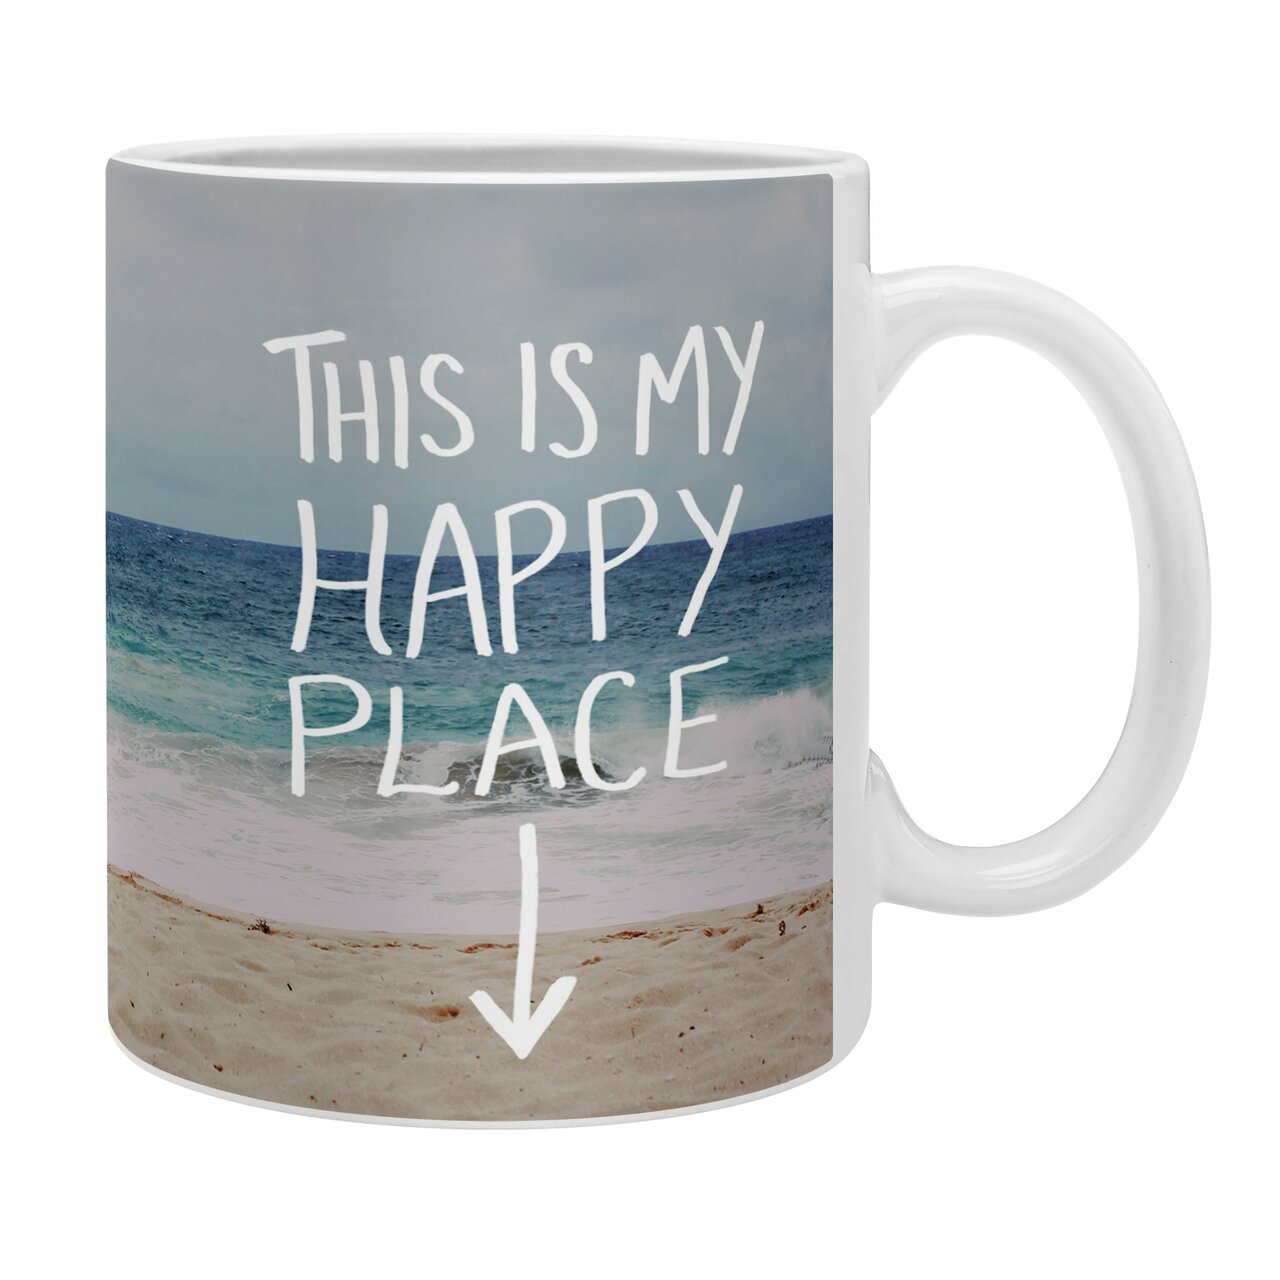 This is my Happy Place Mugs - Set of 4